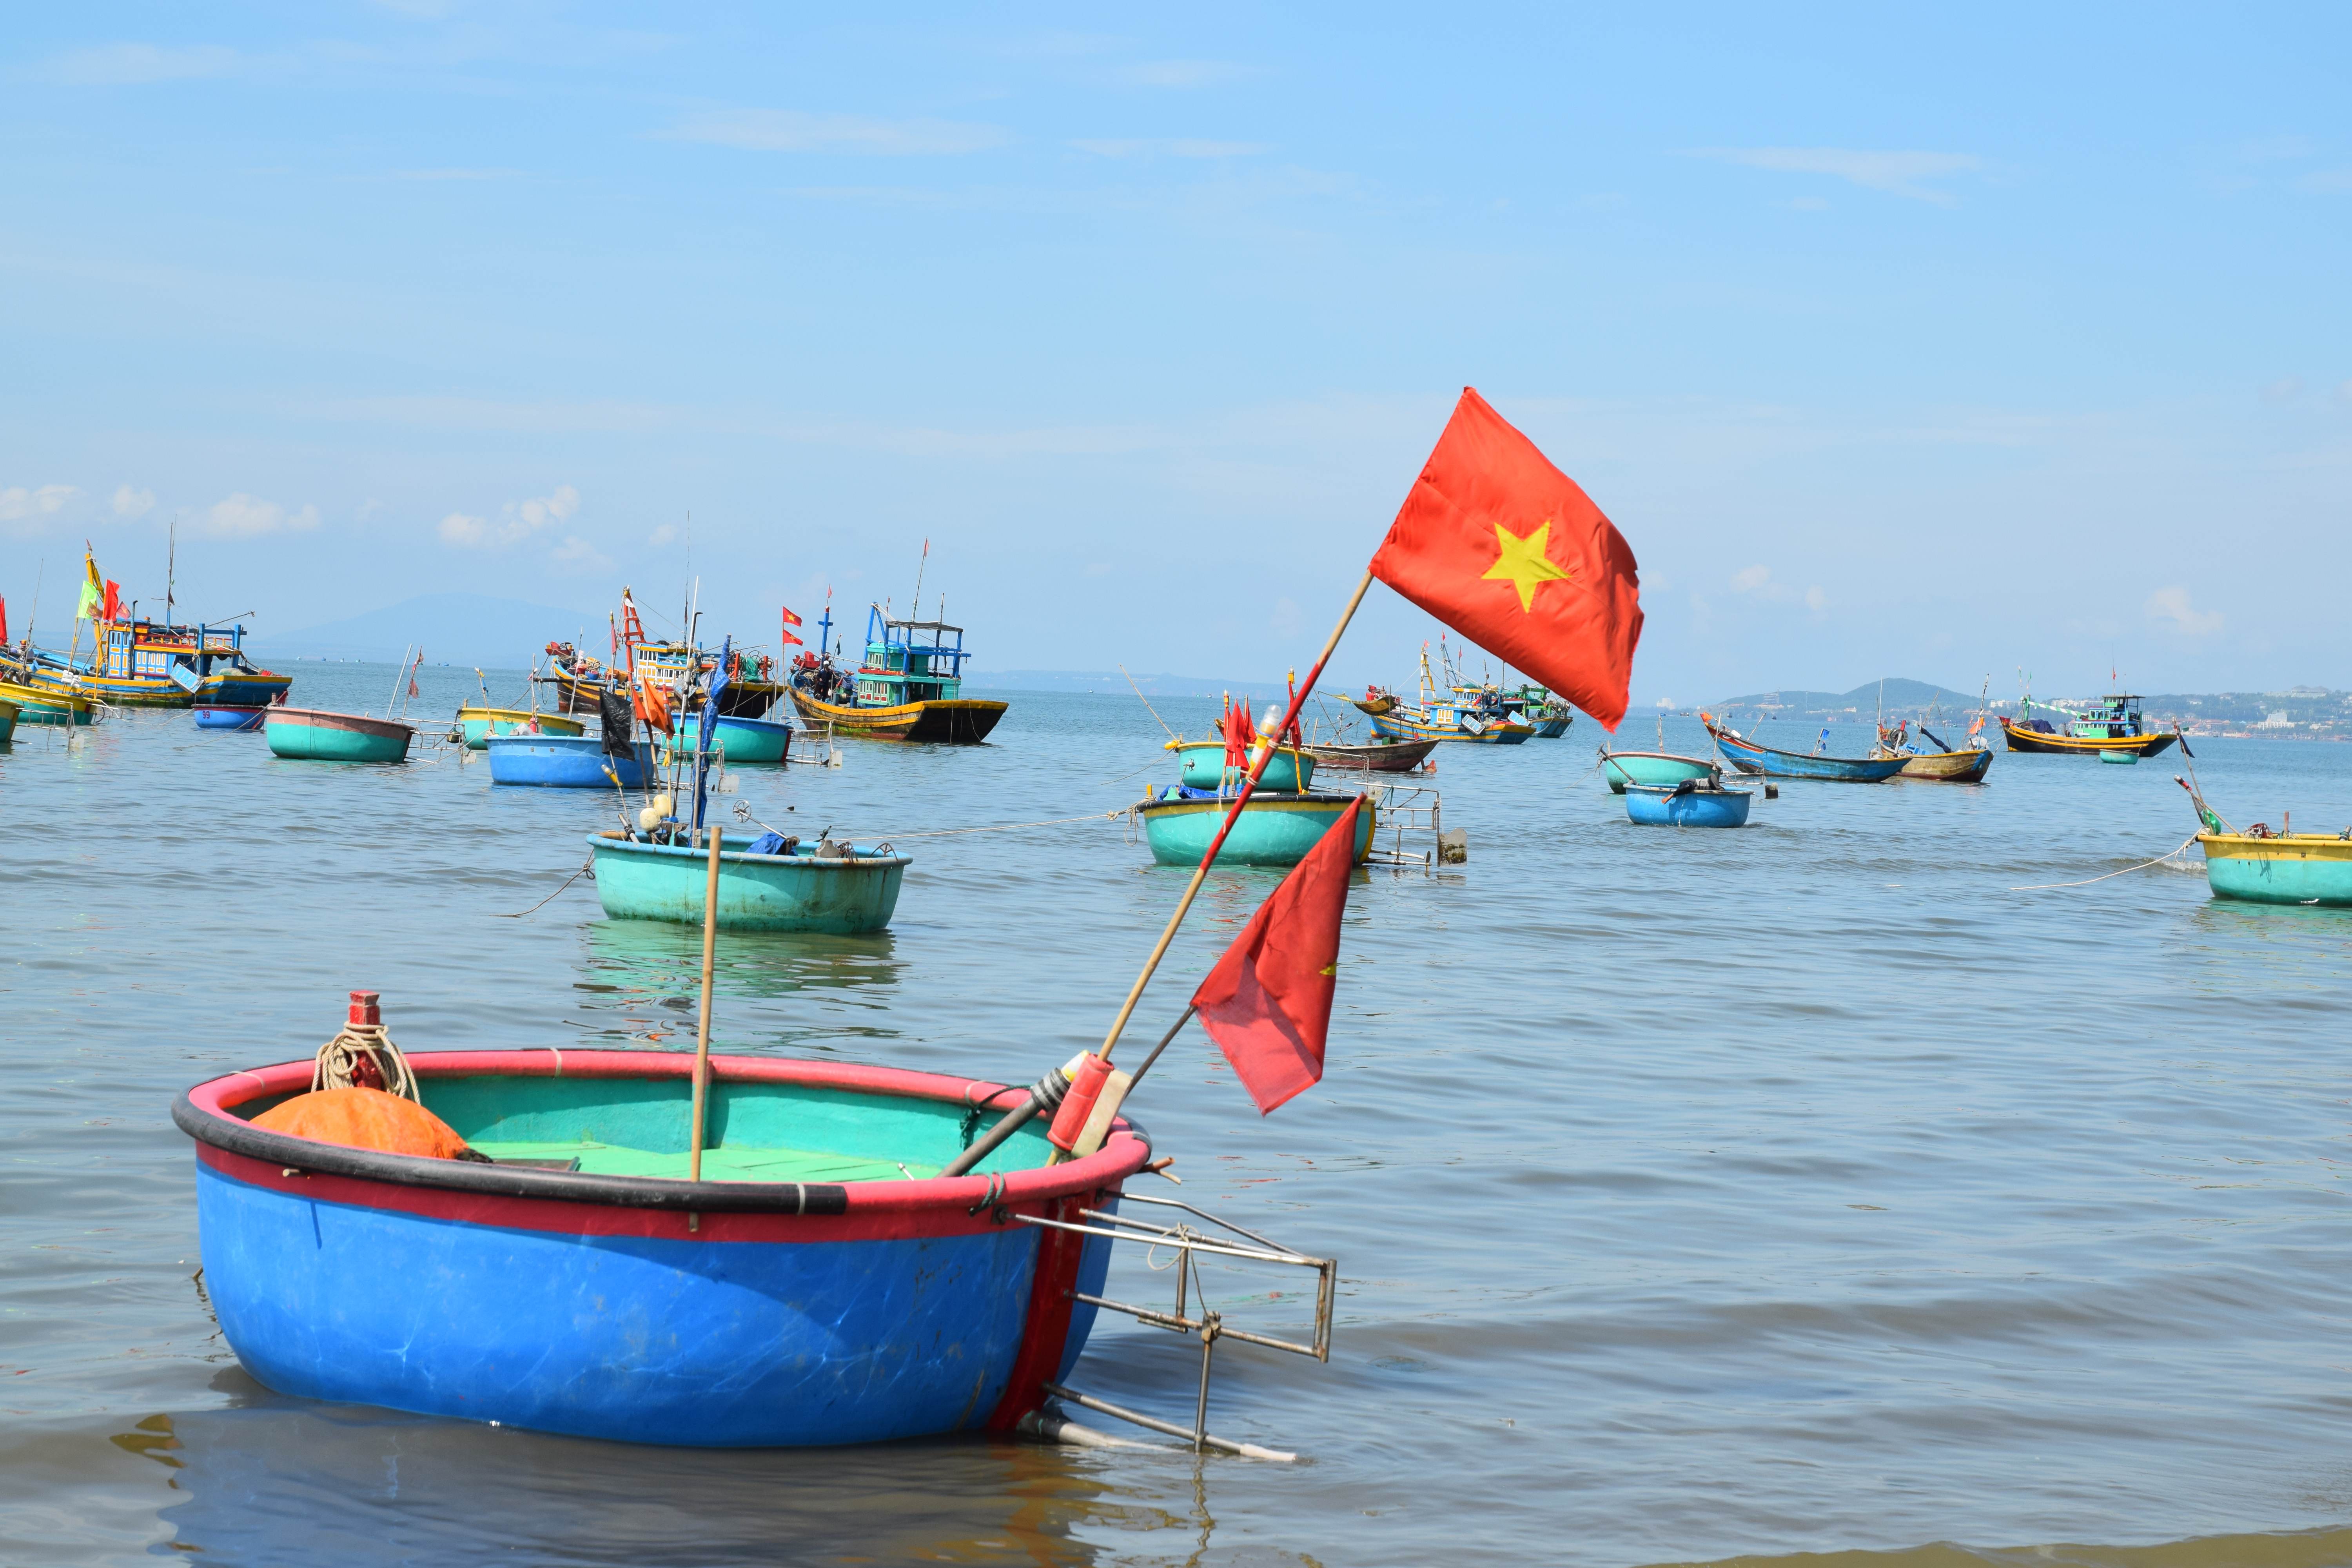 Basket boat, a kind of fishing boats used by fishermen in Vietnam. Photo: Kyle Nunas